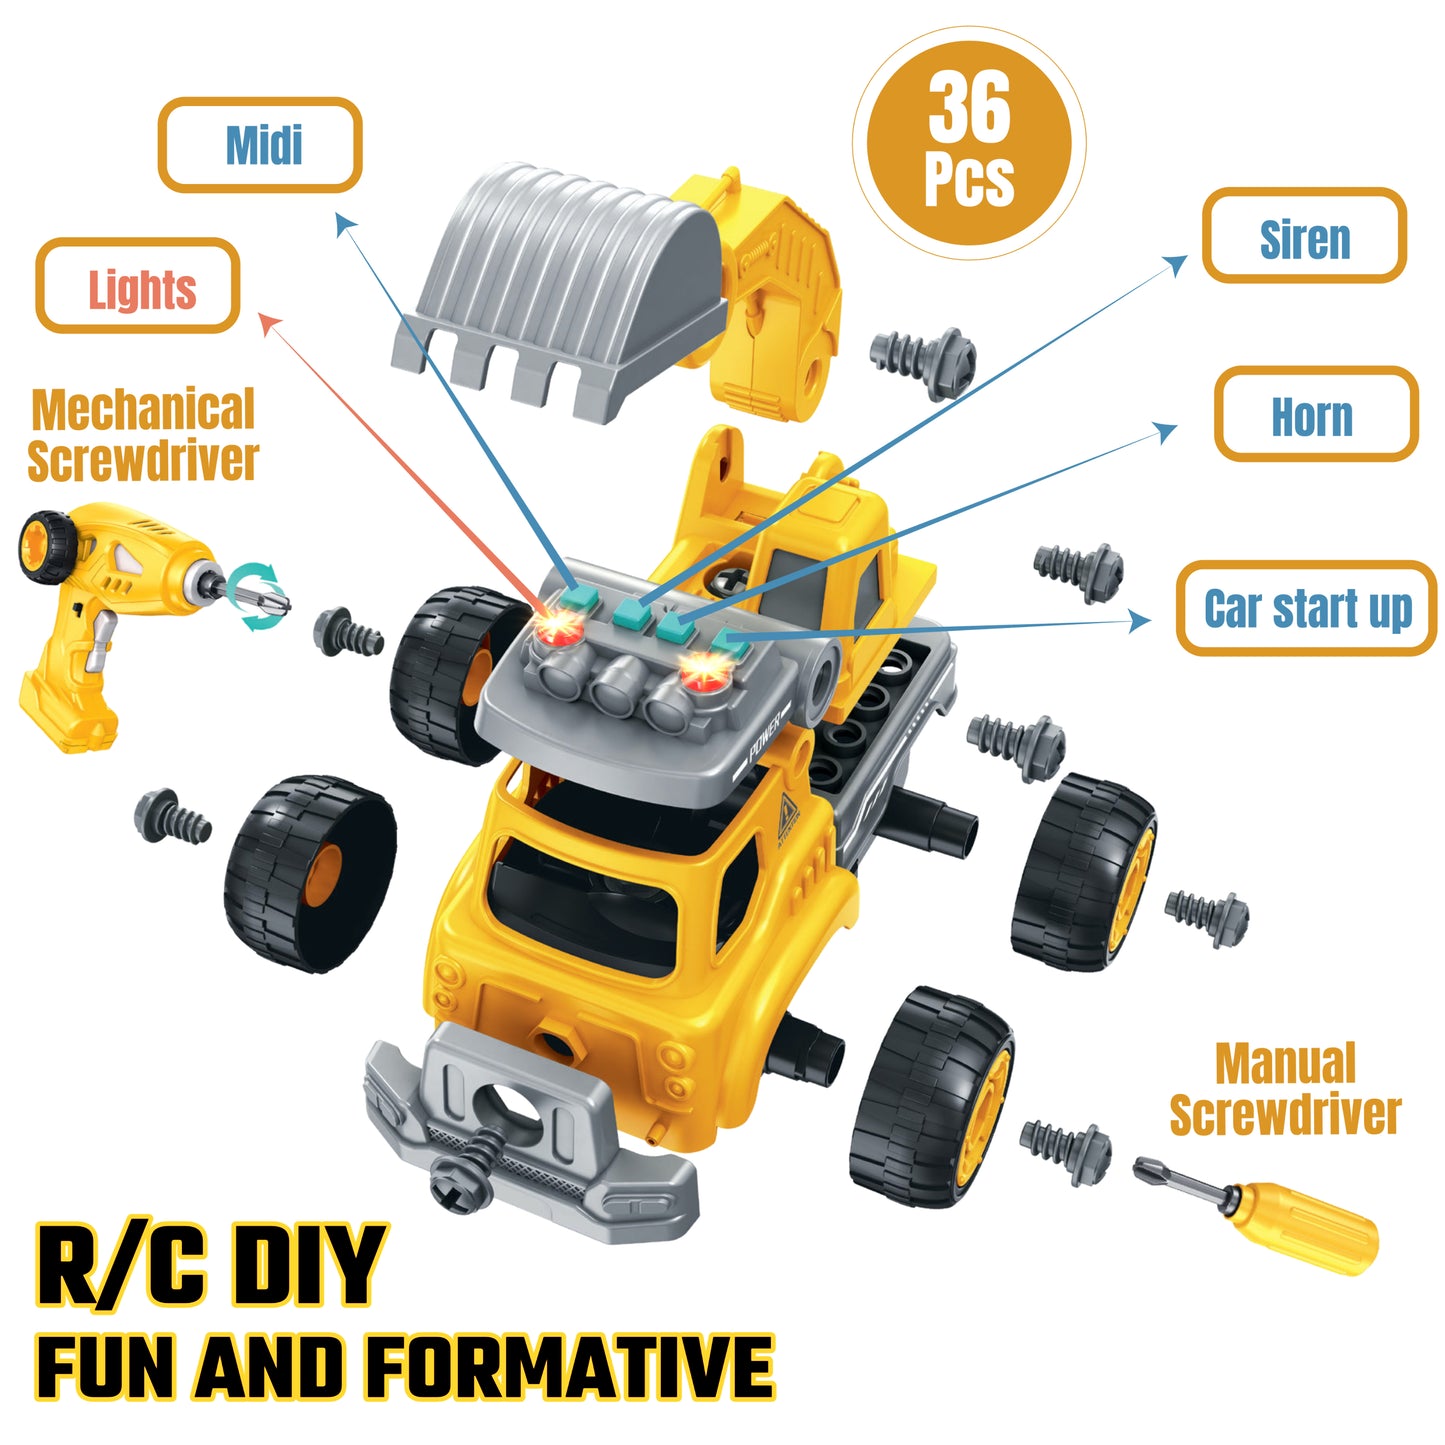 4 in 1 RC Take Apart Construction Trucks Set | Remote Control Toys for Boys and Girls